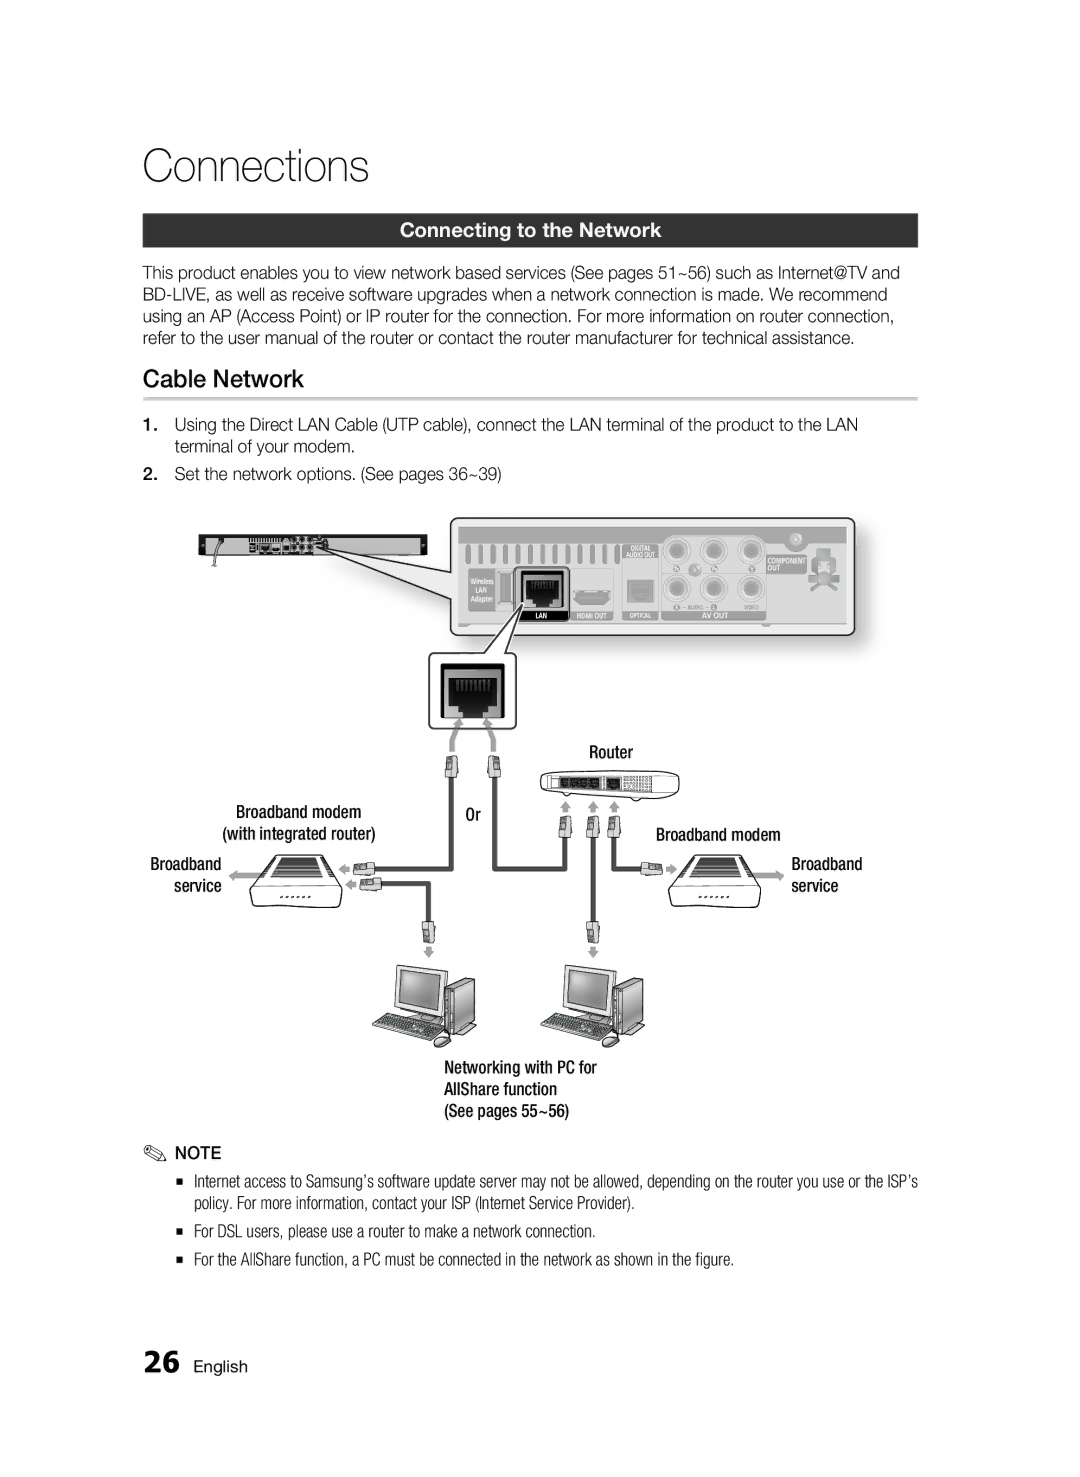 Samsung BD-C5500/XER, BD-C5500P/XER manual Cable Network, Connecting to the Network, Service, Broadband 